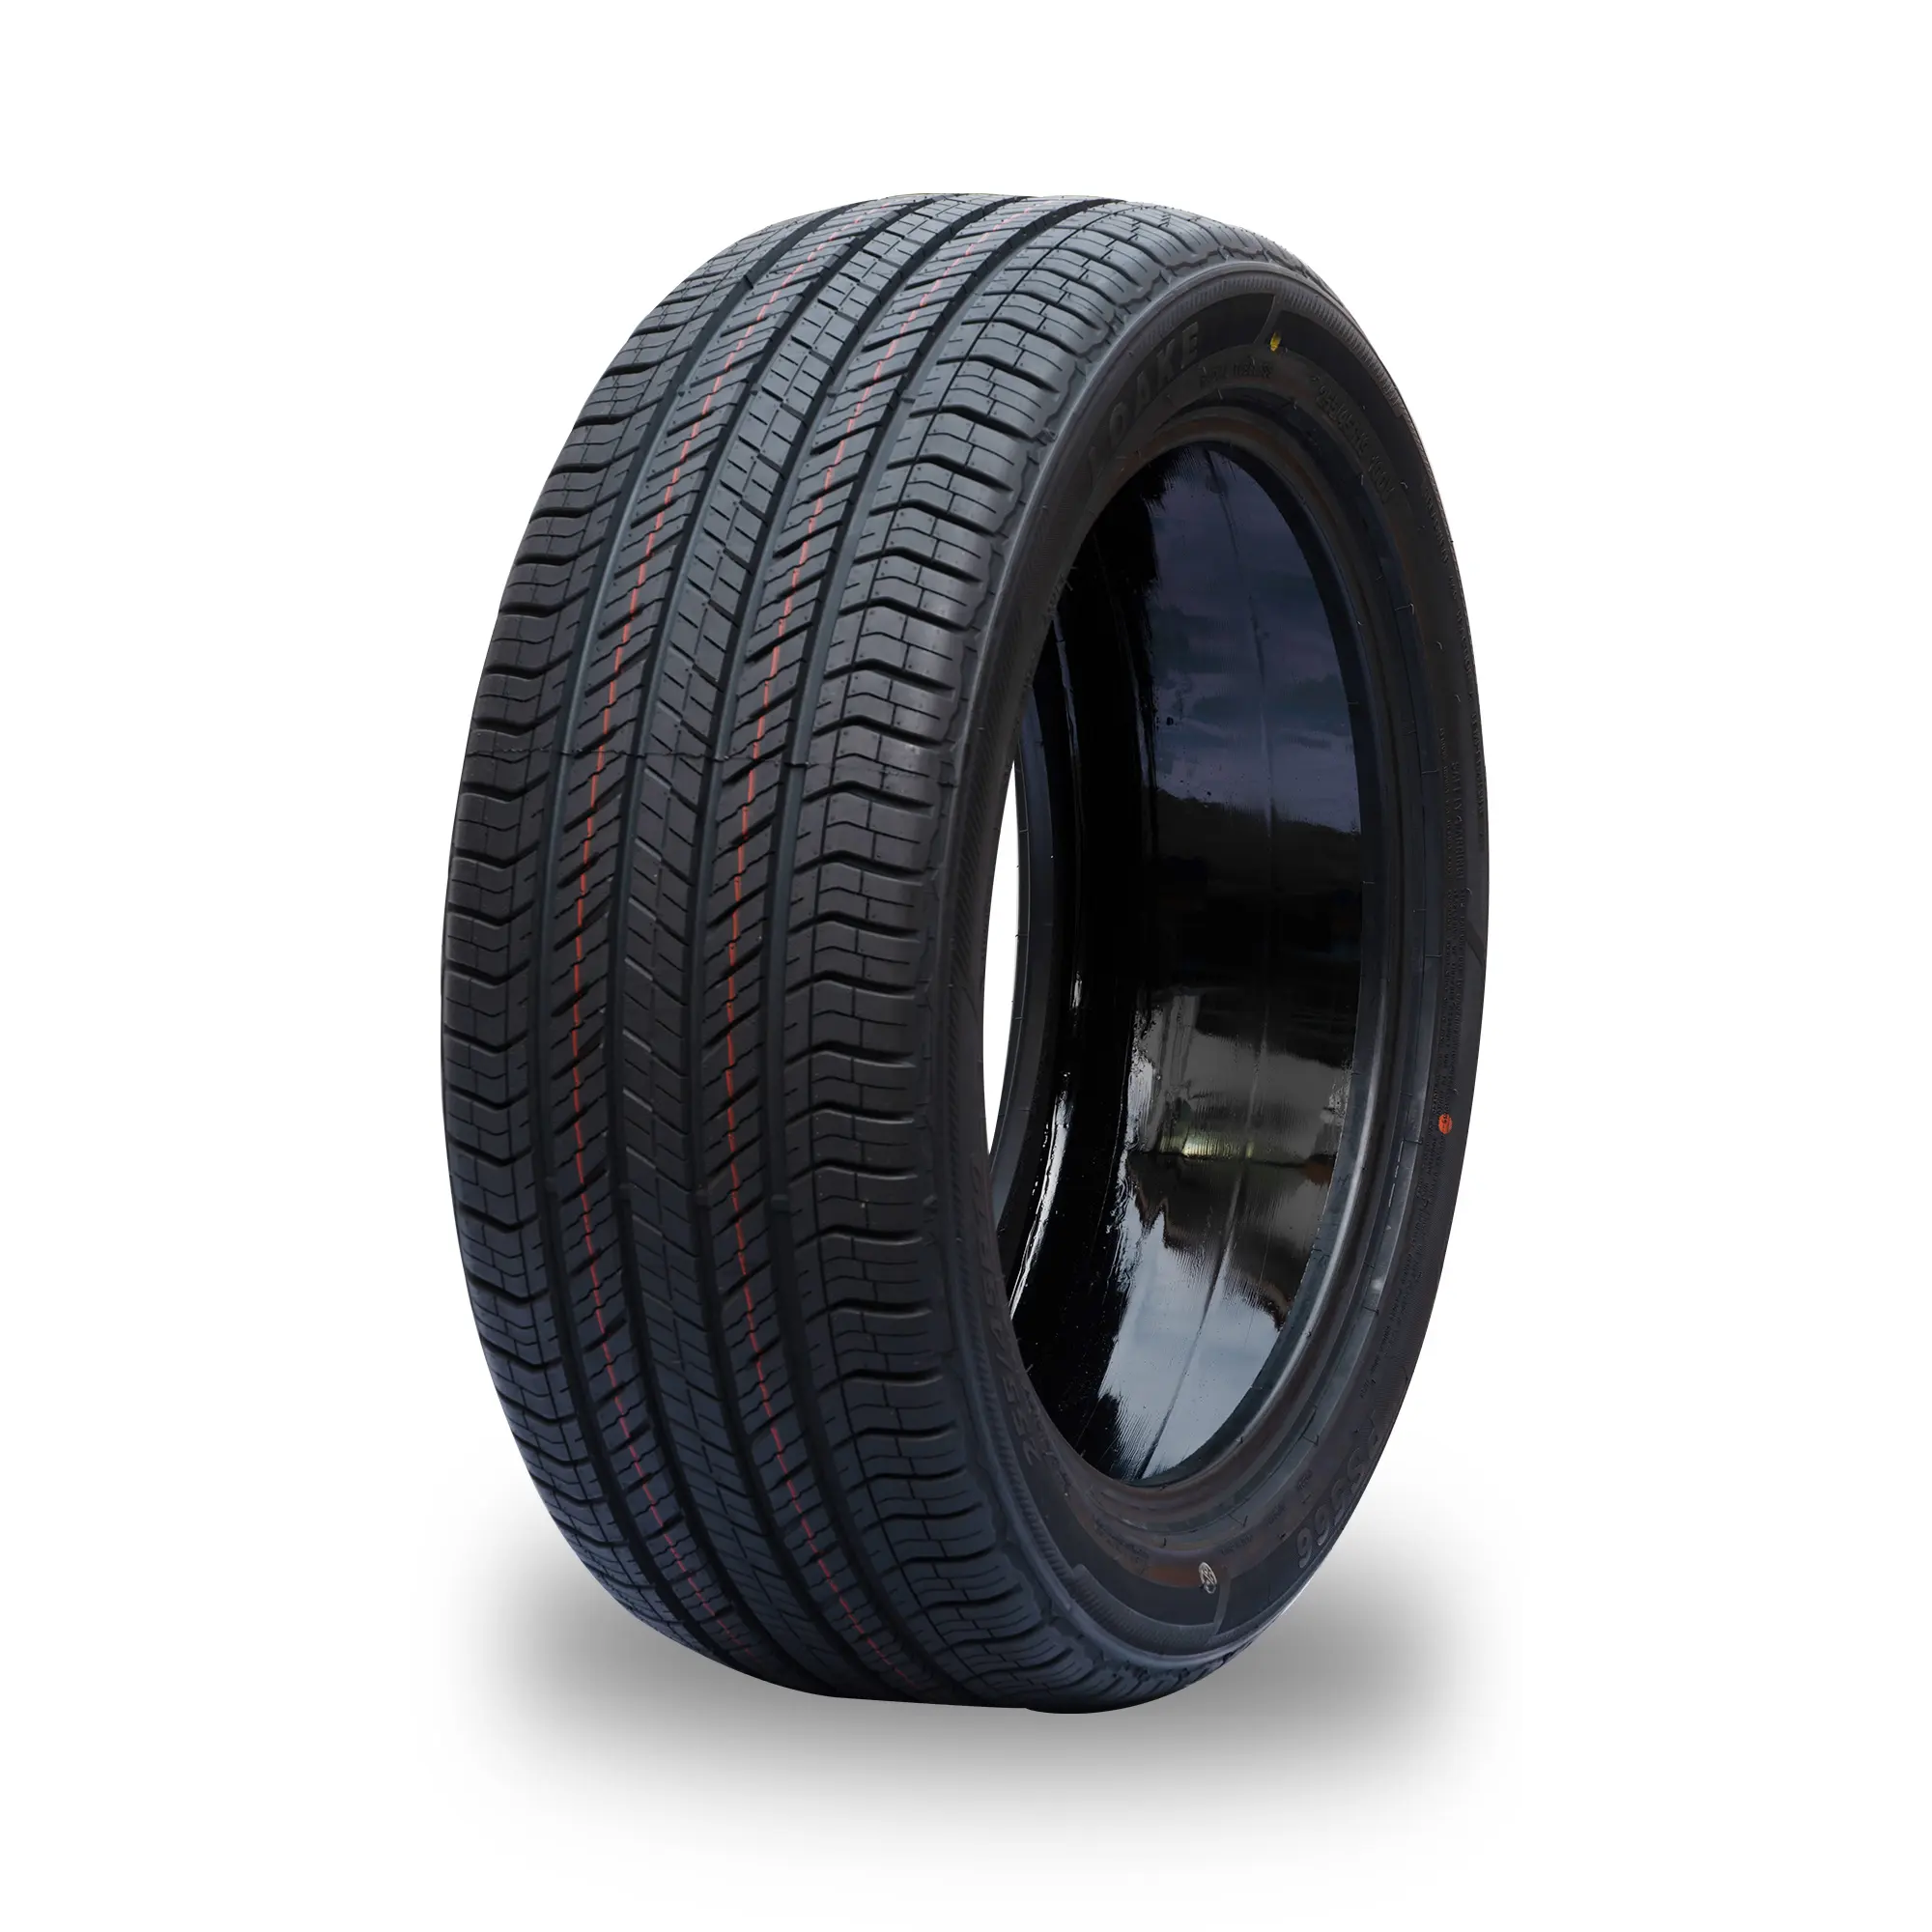 Factory New Self-Sealing Technology High Quality Passenger Vehicle Safety Tyres